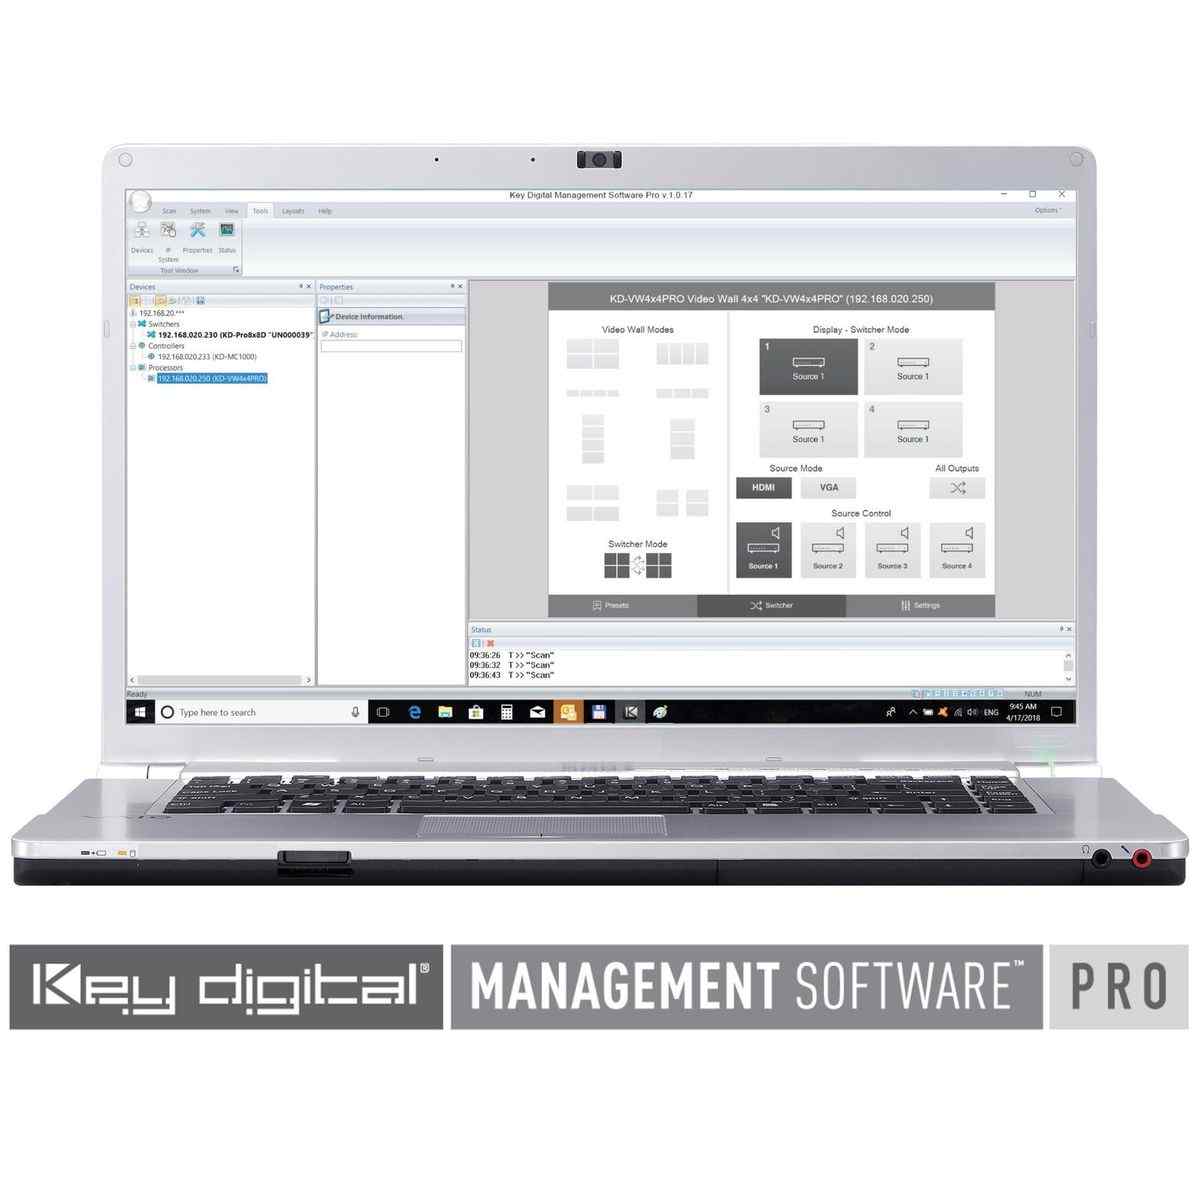 KD products and systems software user interface